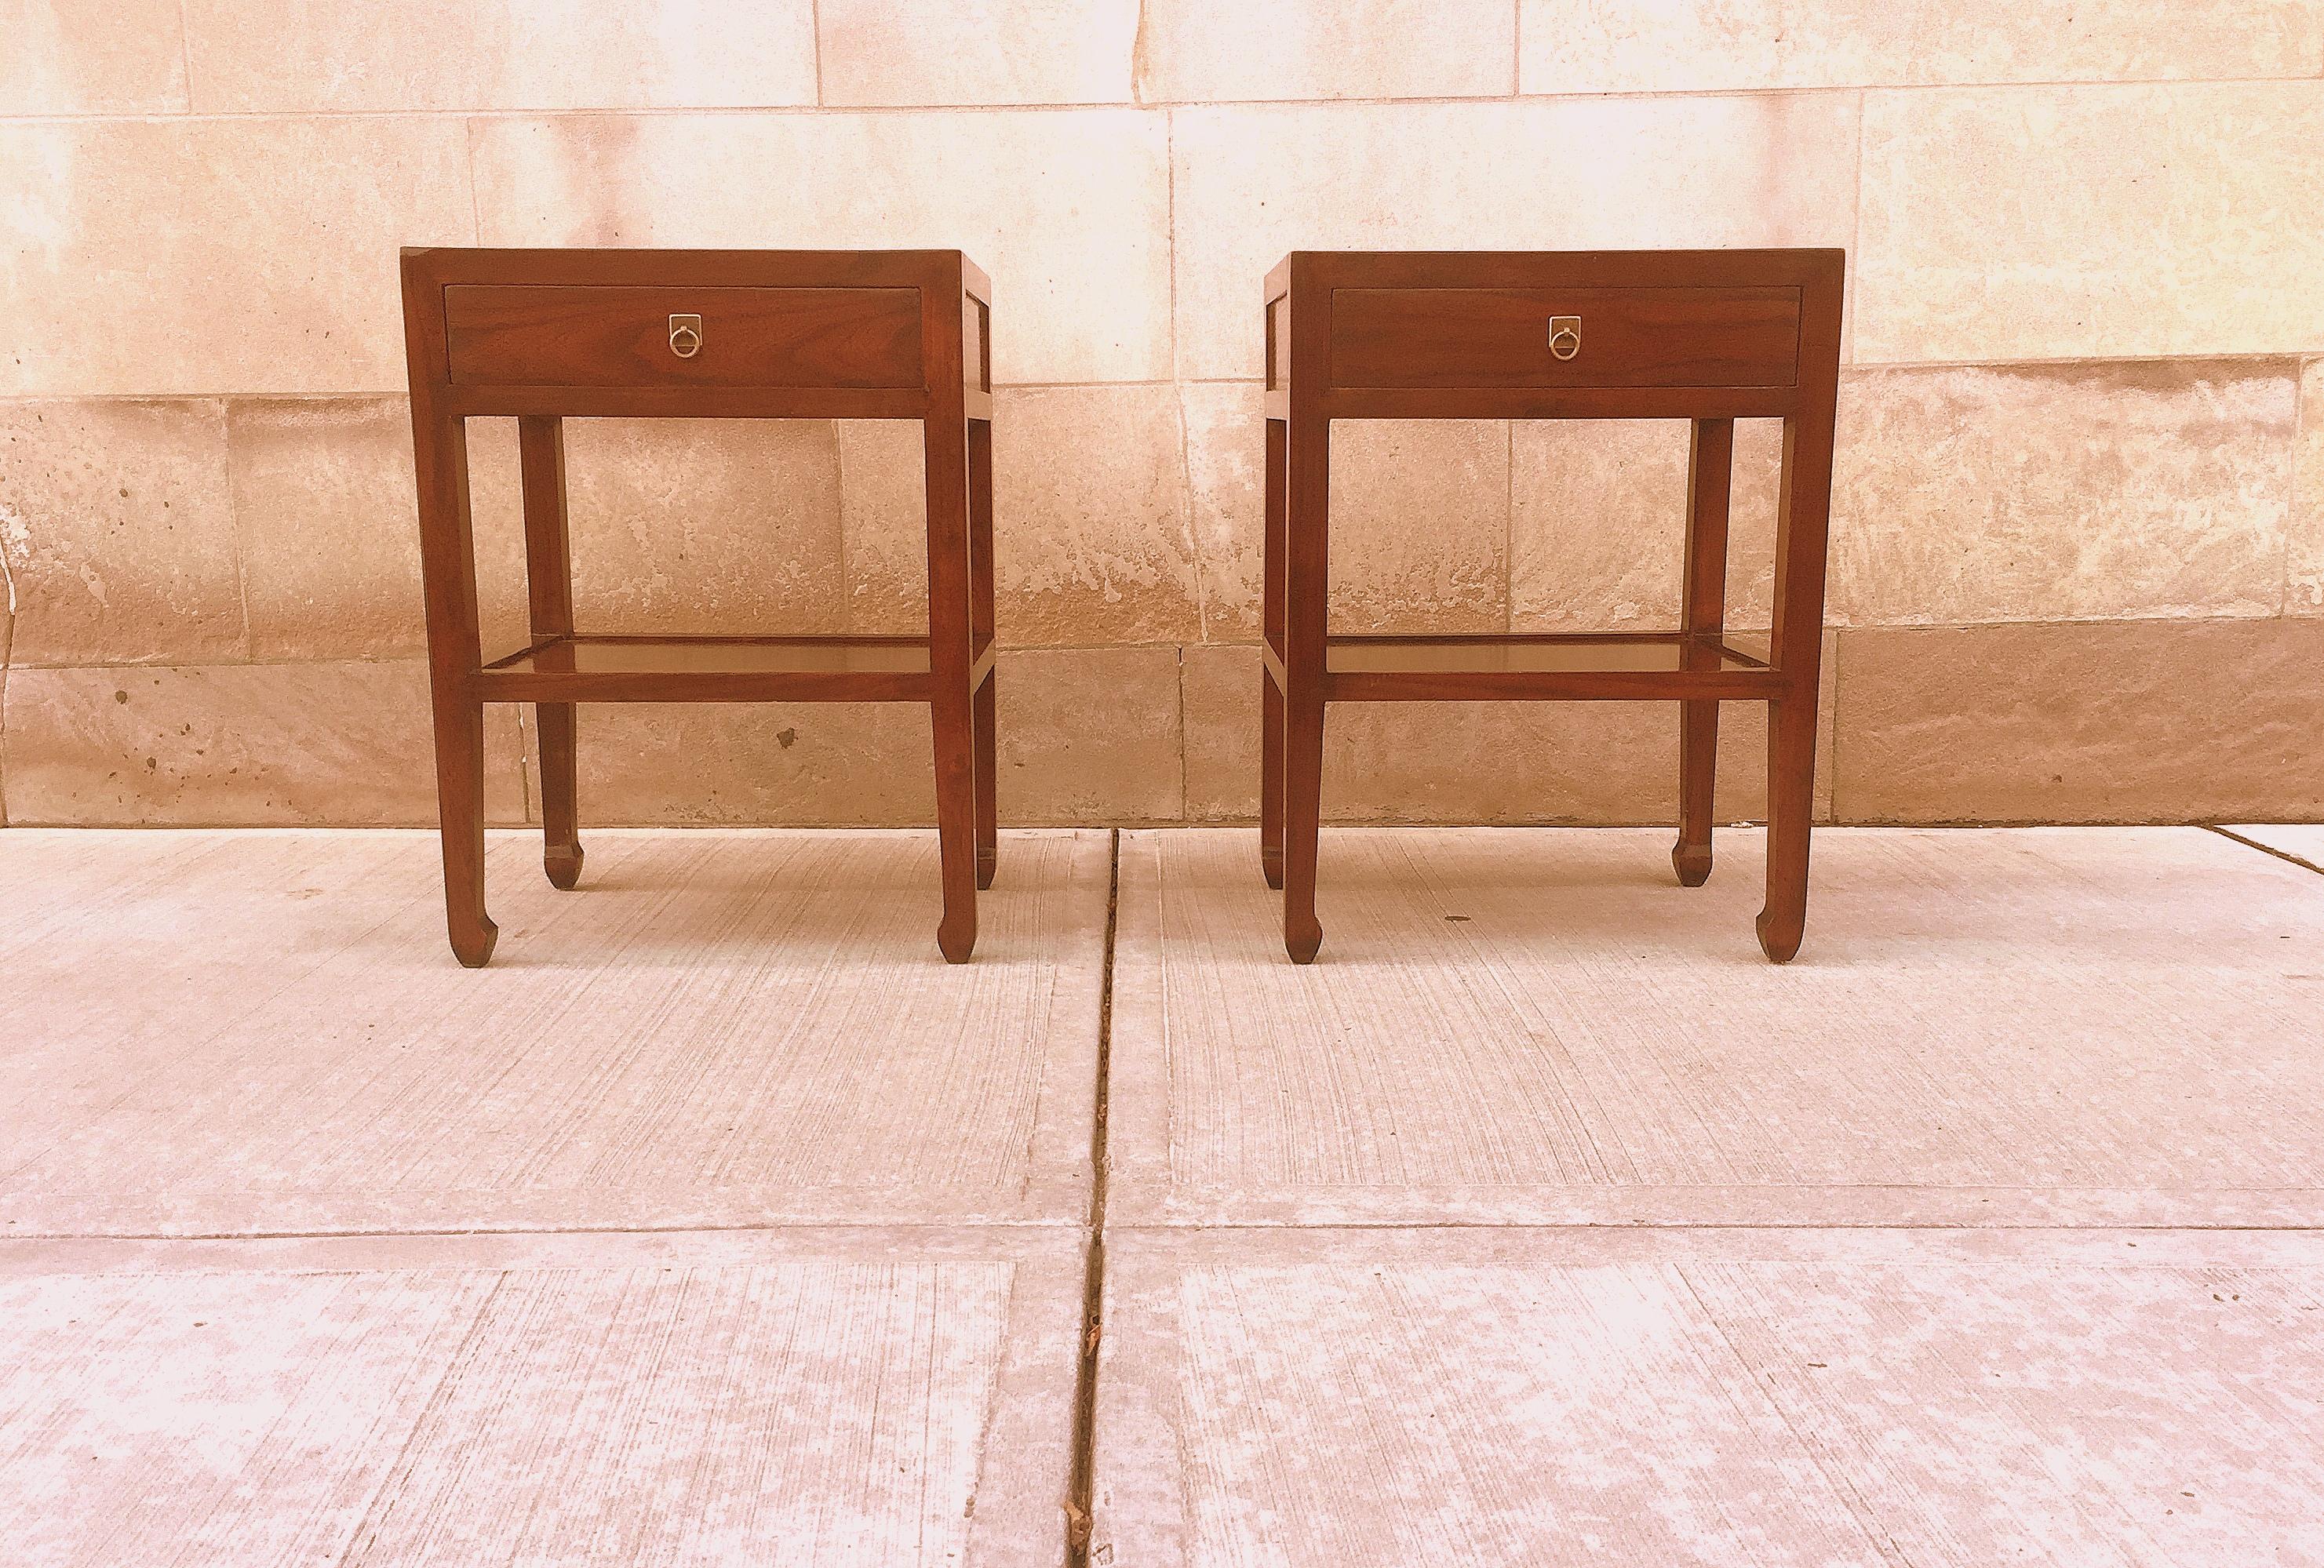 Pair of fine Jumu end tables, with drawers and shelf. Very elegant and fine quality and beautiful color. We carry fine quality furniture with elegant finished and has been appeared many times in 